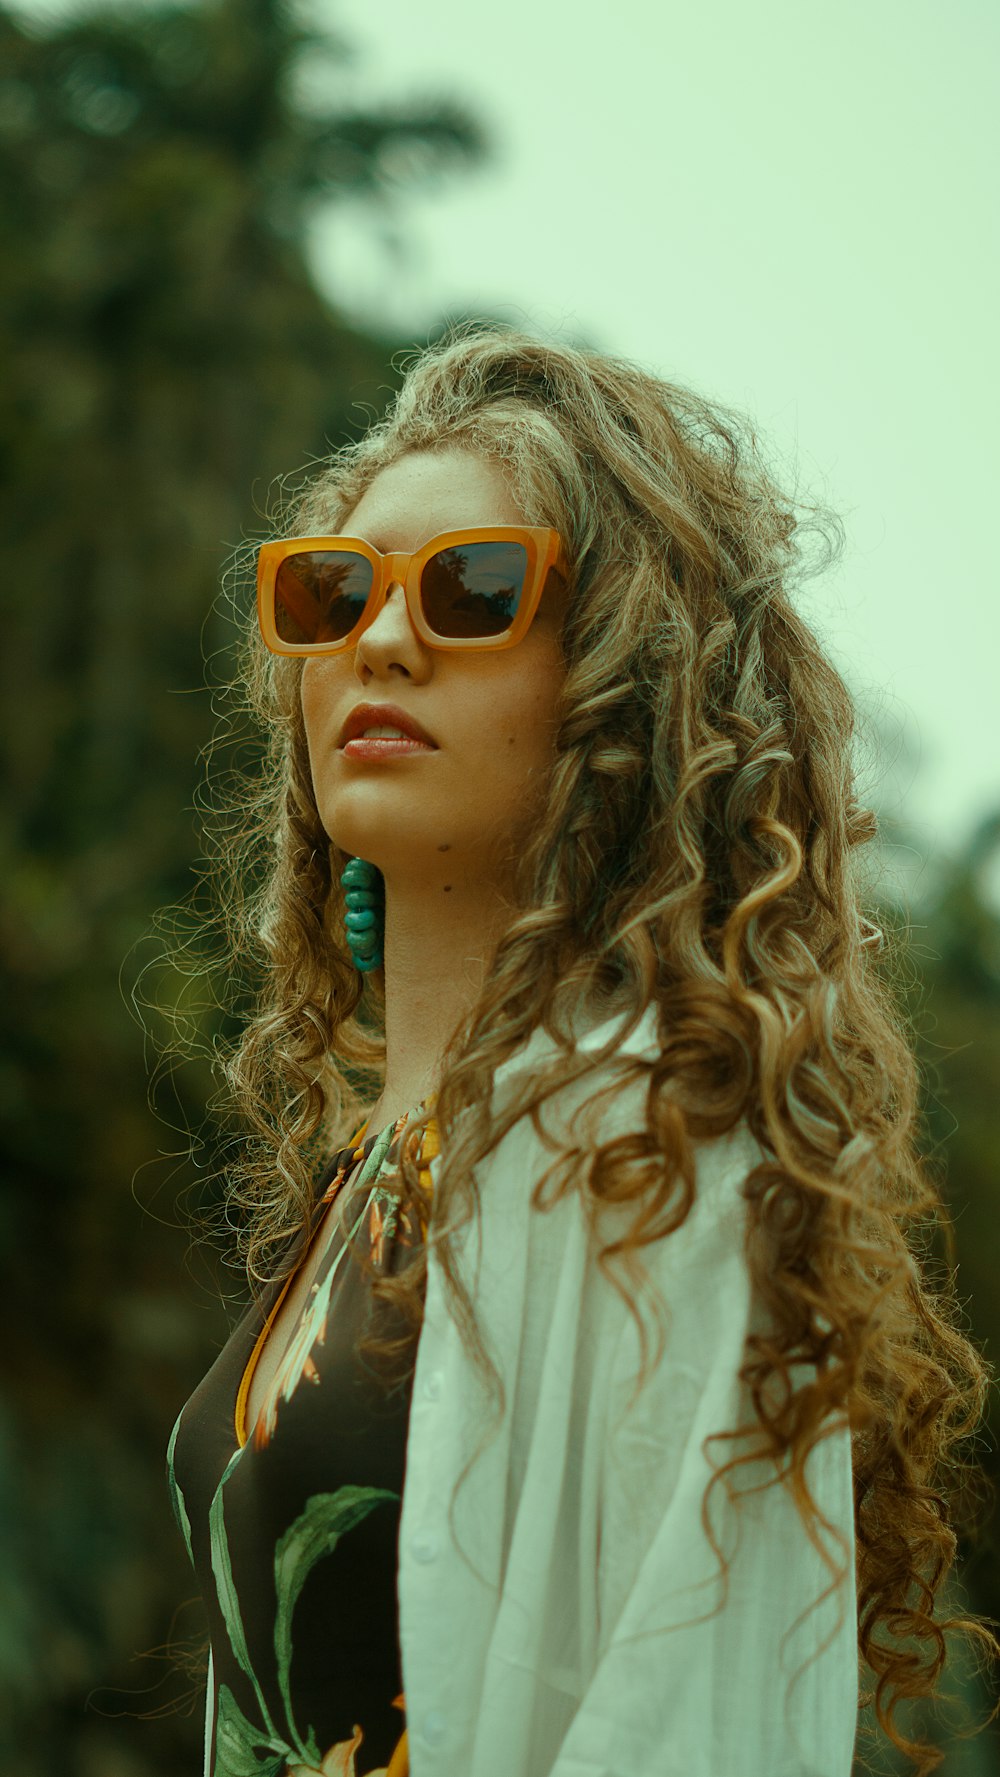 a woman with long curly hair wearing sunglasses